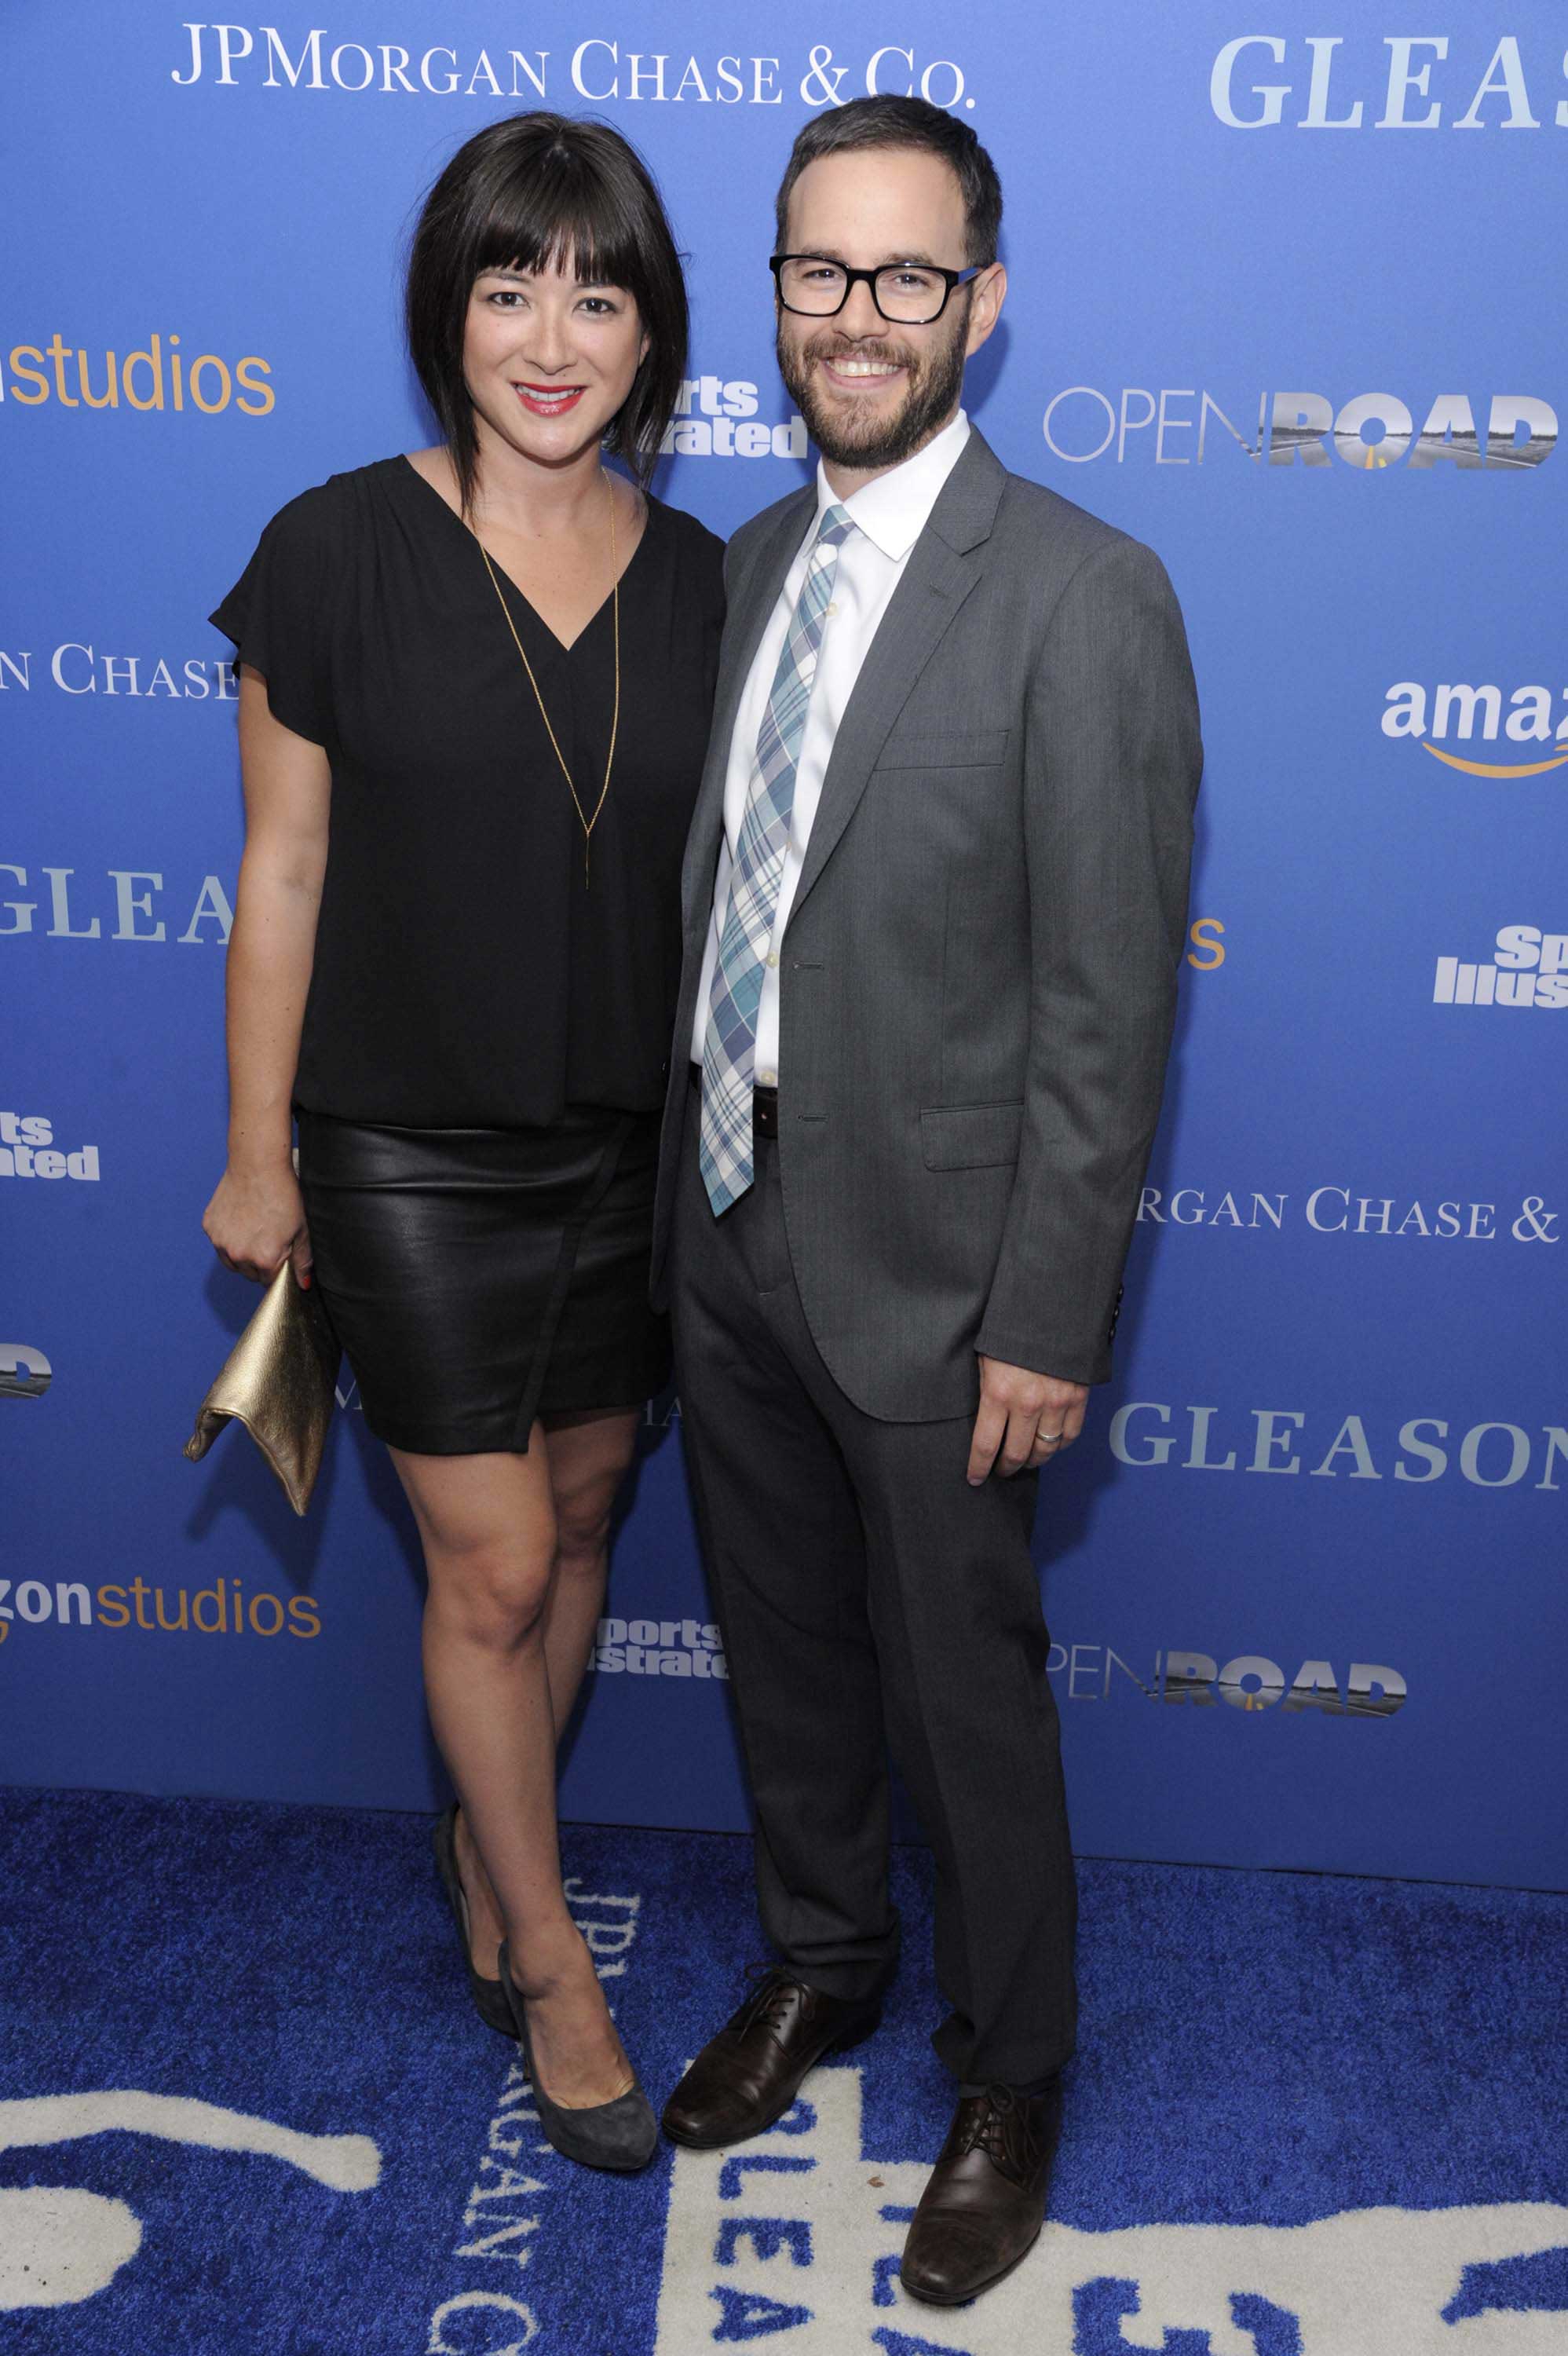 Mary Rohlich attends the Gleason New York premiere